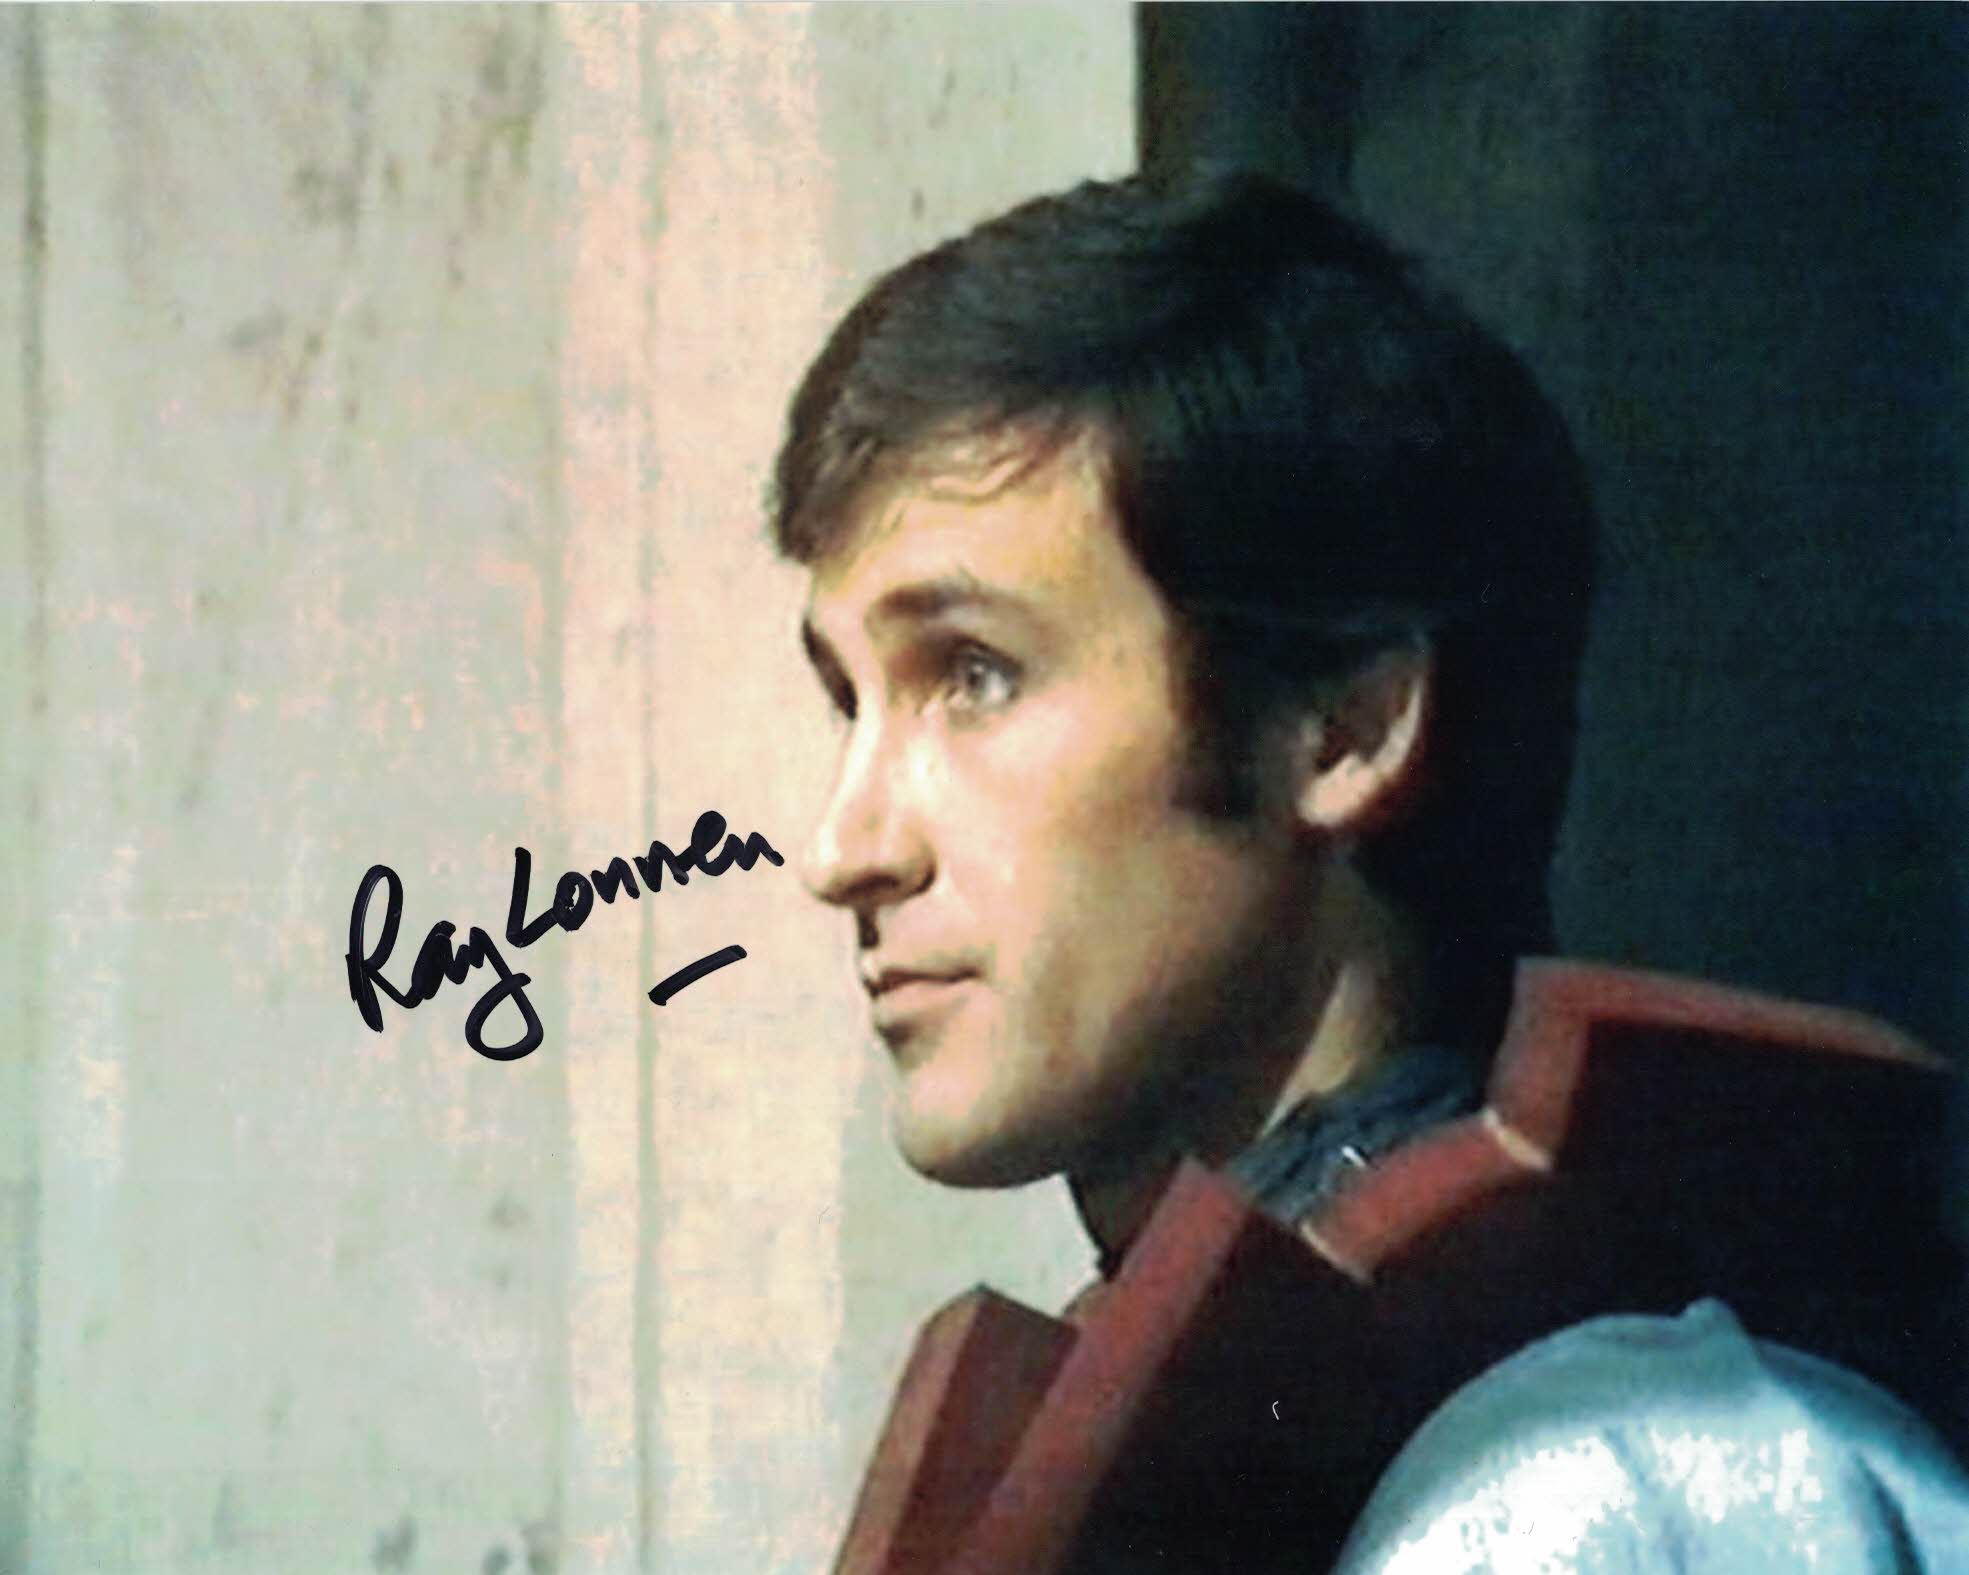 RAY LONNEN - Gardiner - Frontier in Space - Doctor Who hand signed 10 x 8 photo